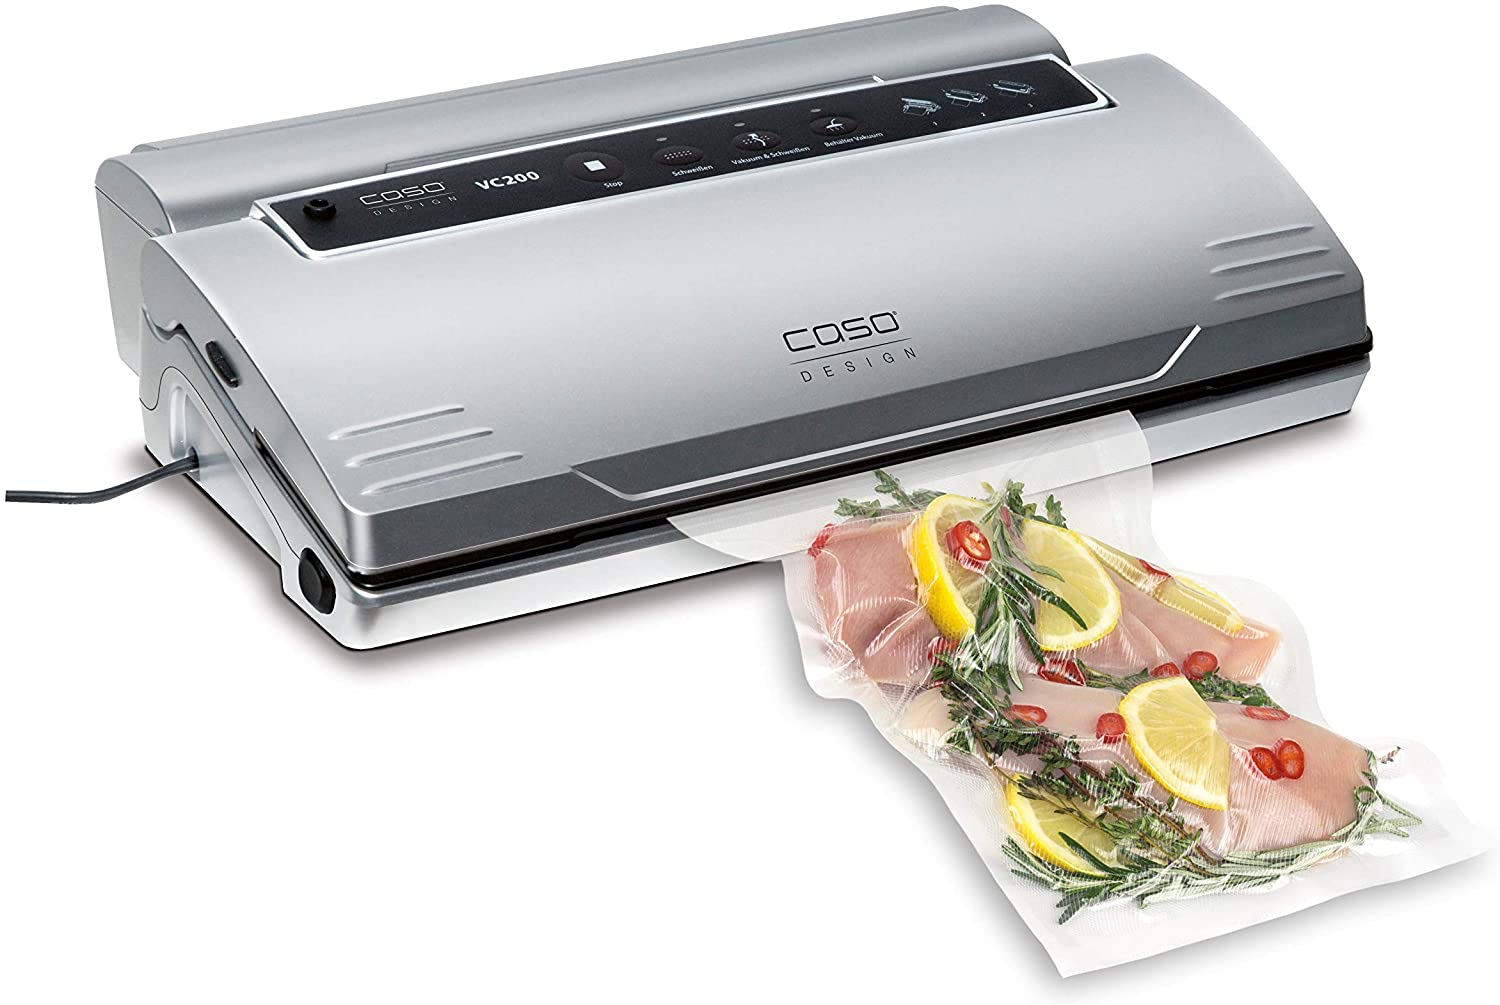 CASO VC200 vacuum sealer - vacuum sealer, food stays fresh up to 8x longer, double weld seam, incl. Foil box and cutter, incl. 2 professional foil rolls & hose for vacuum container